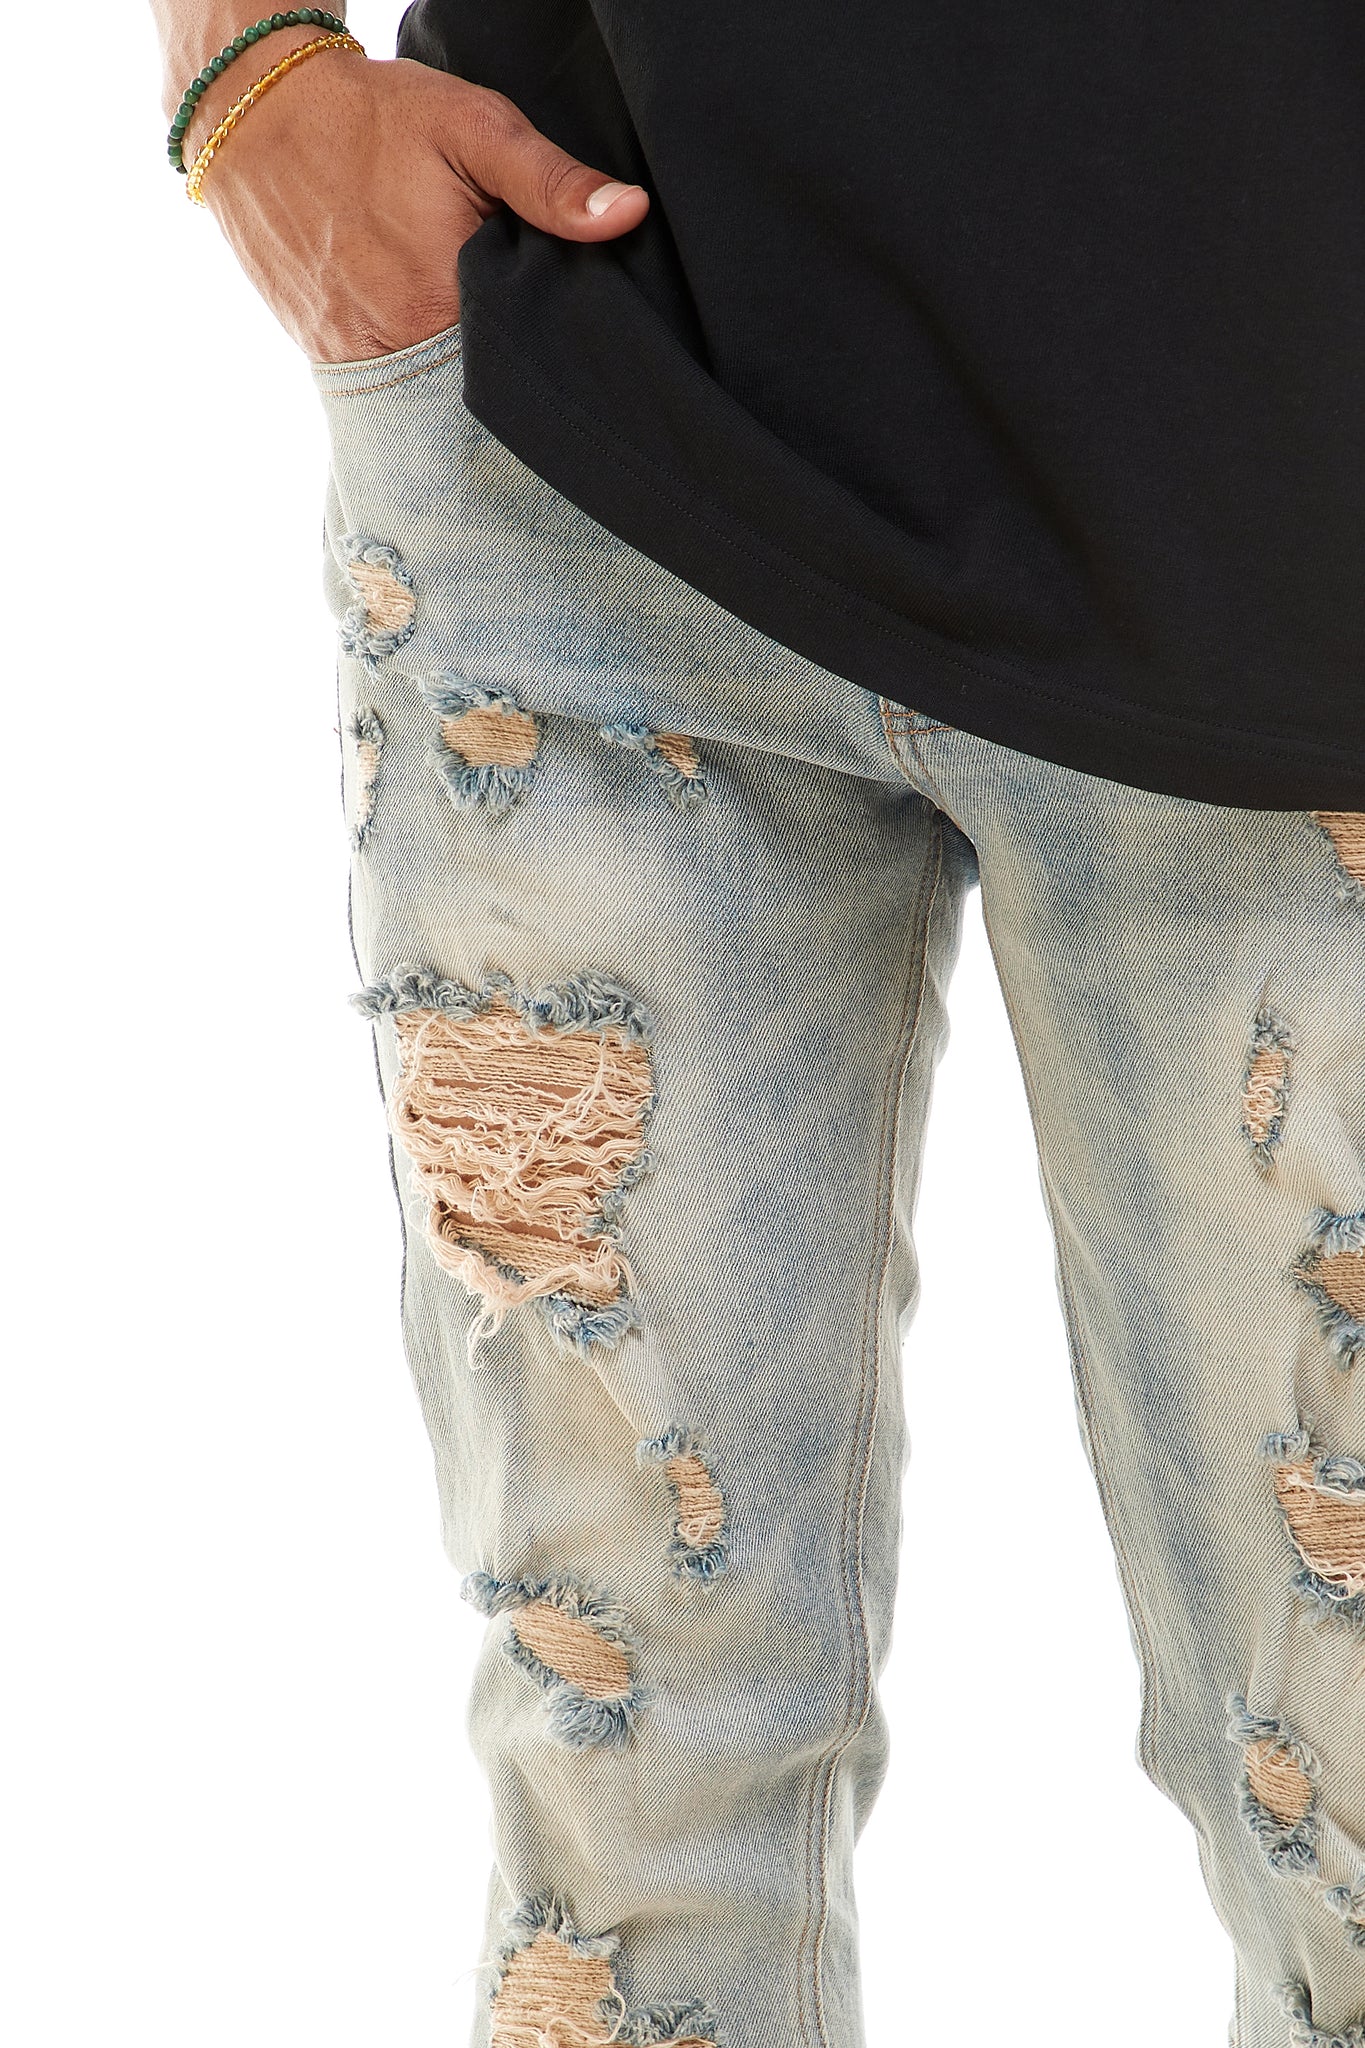 MULTI-DISTRESSED JEANS WITH ANKLED ZIPPERS